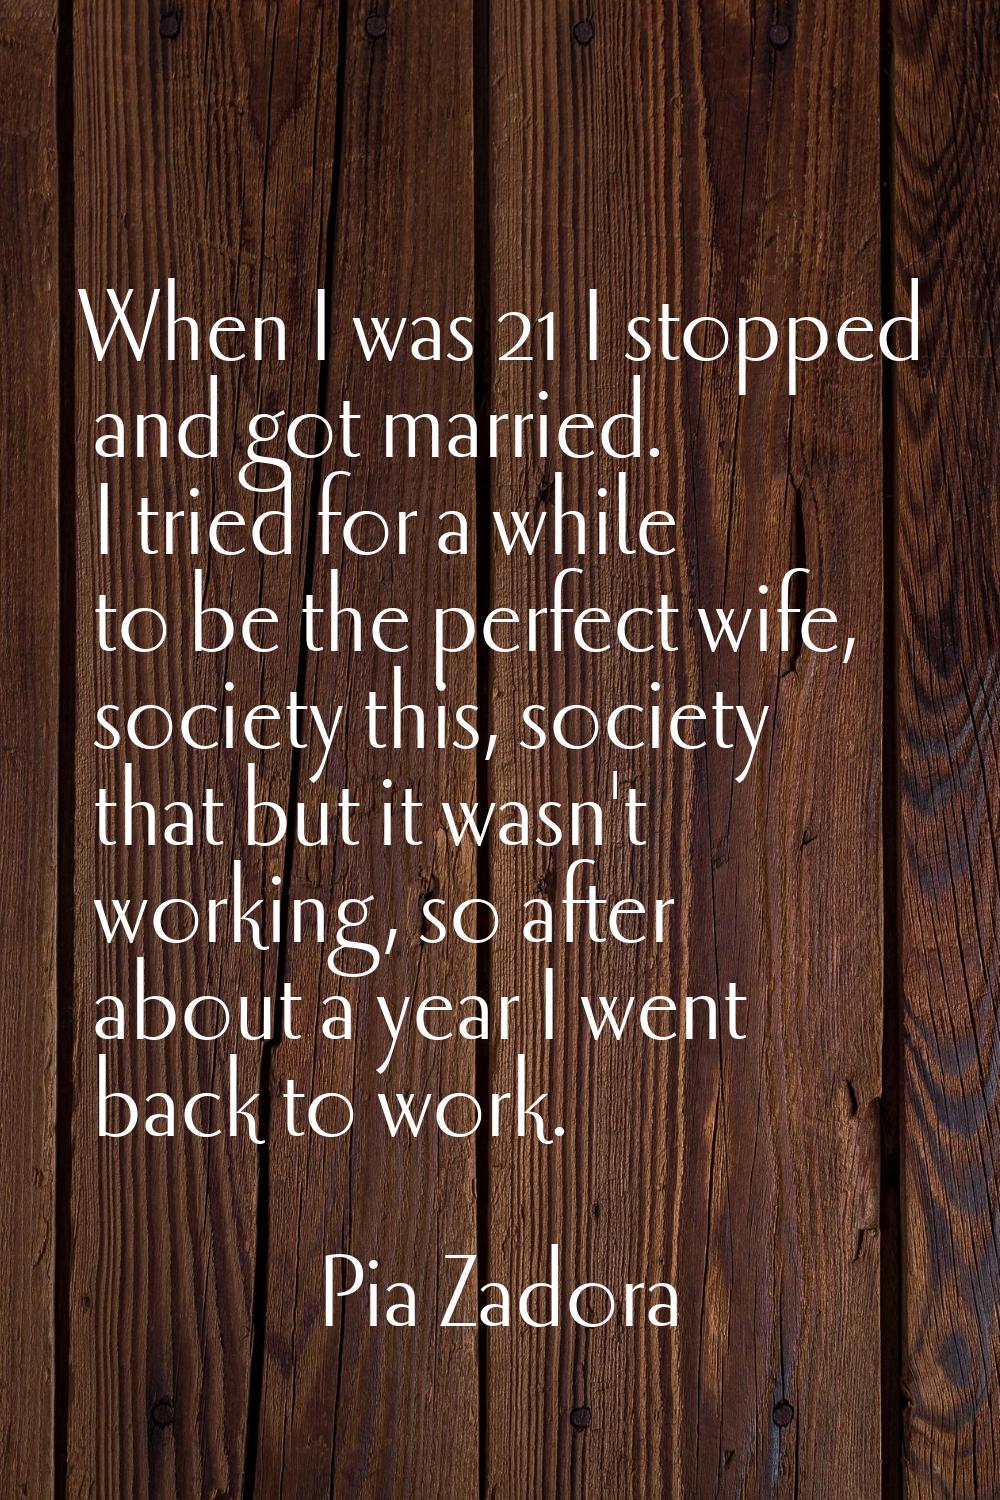 When I was 21 I stopped and got married. I tried for a while to be the perfect wife, society this, 